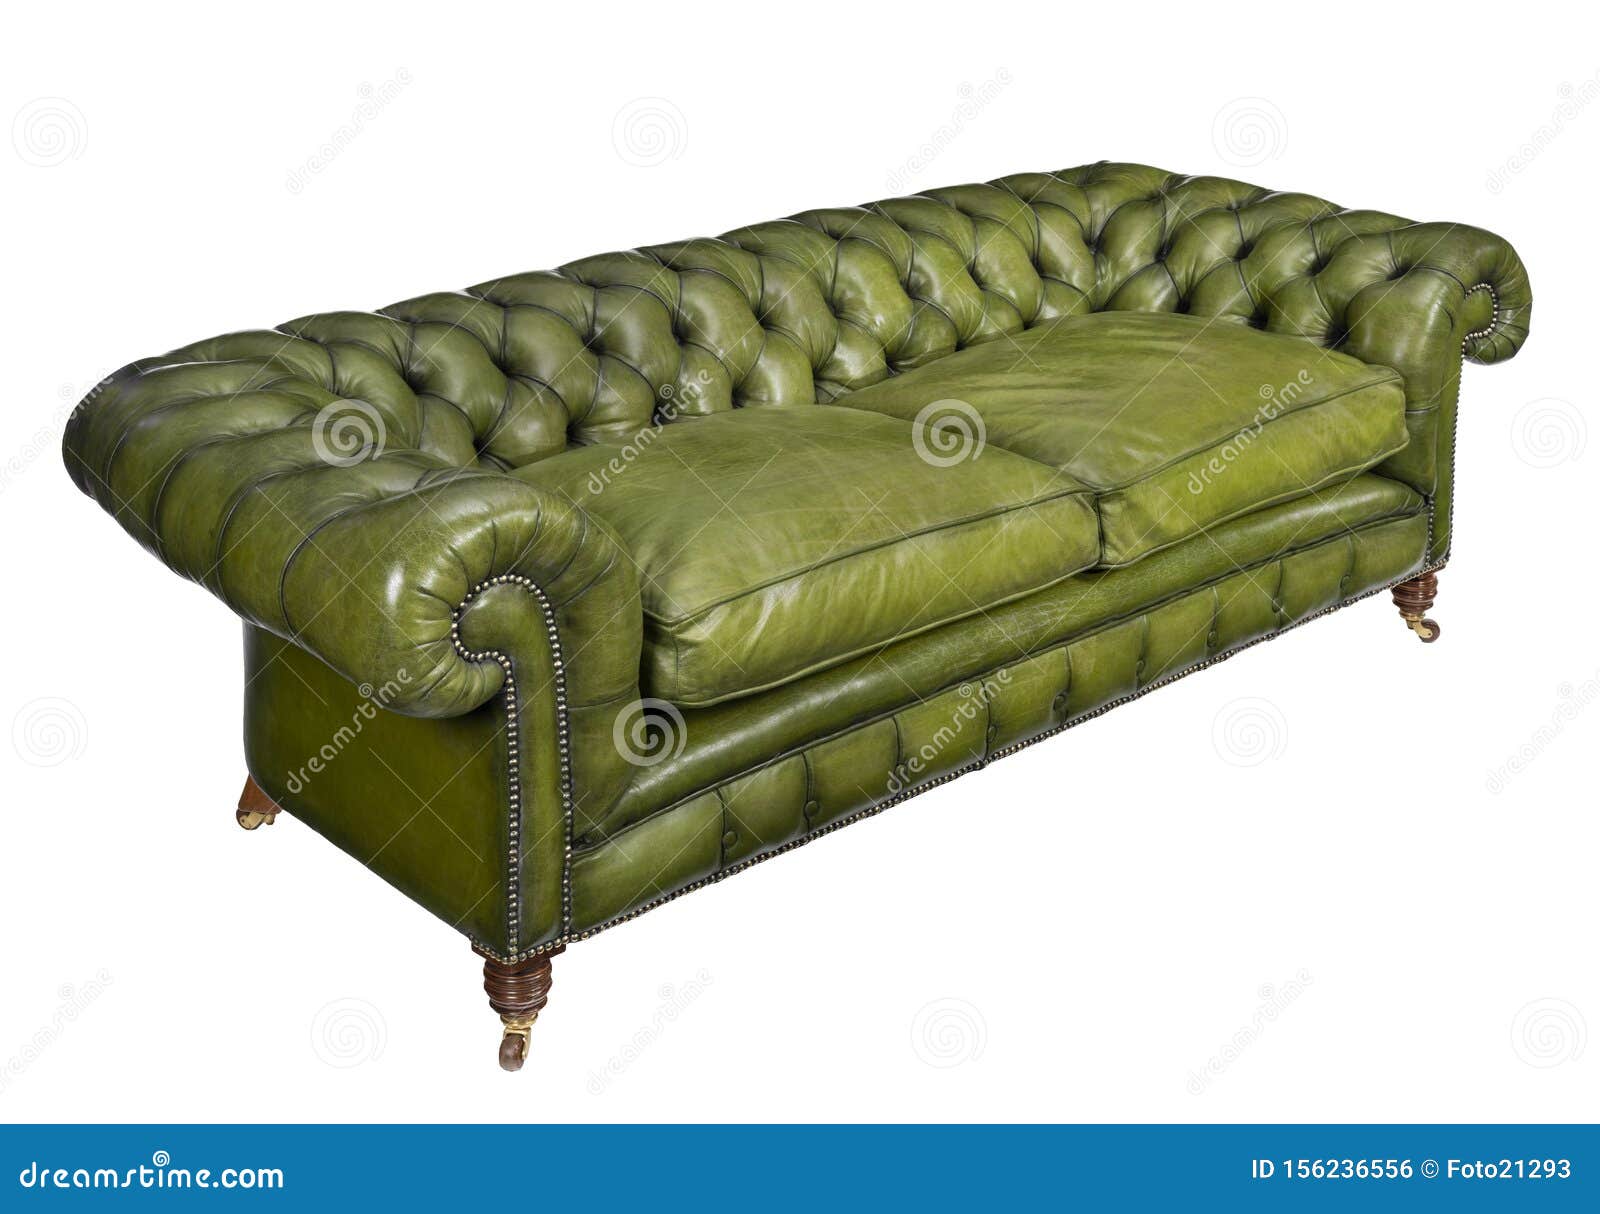 Classic Green Leather Sofa Isolated On White Stock Photo Image Of Furniture Comfortable 156236556